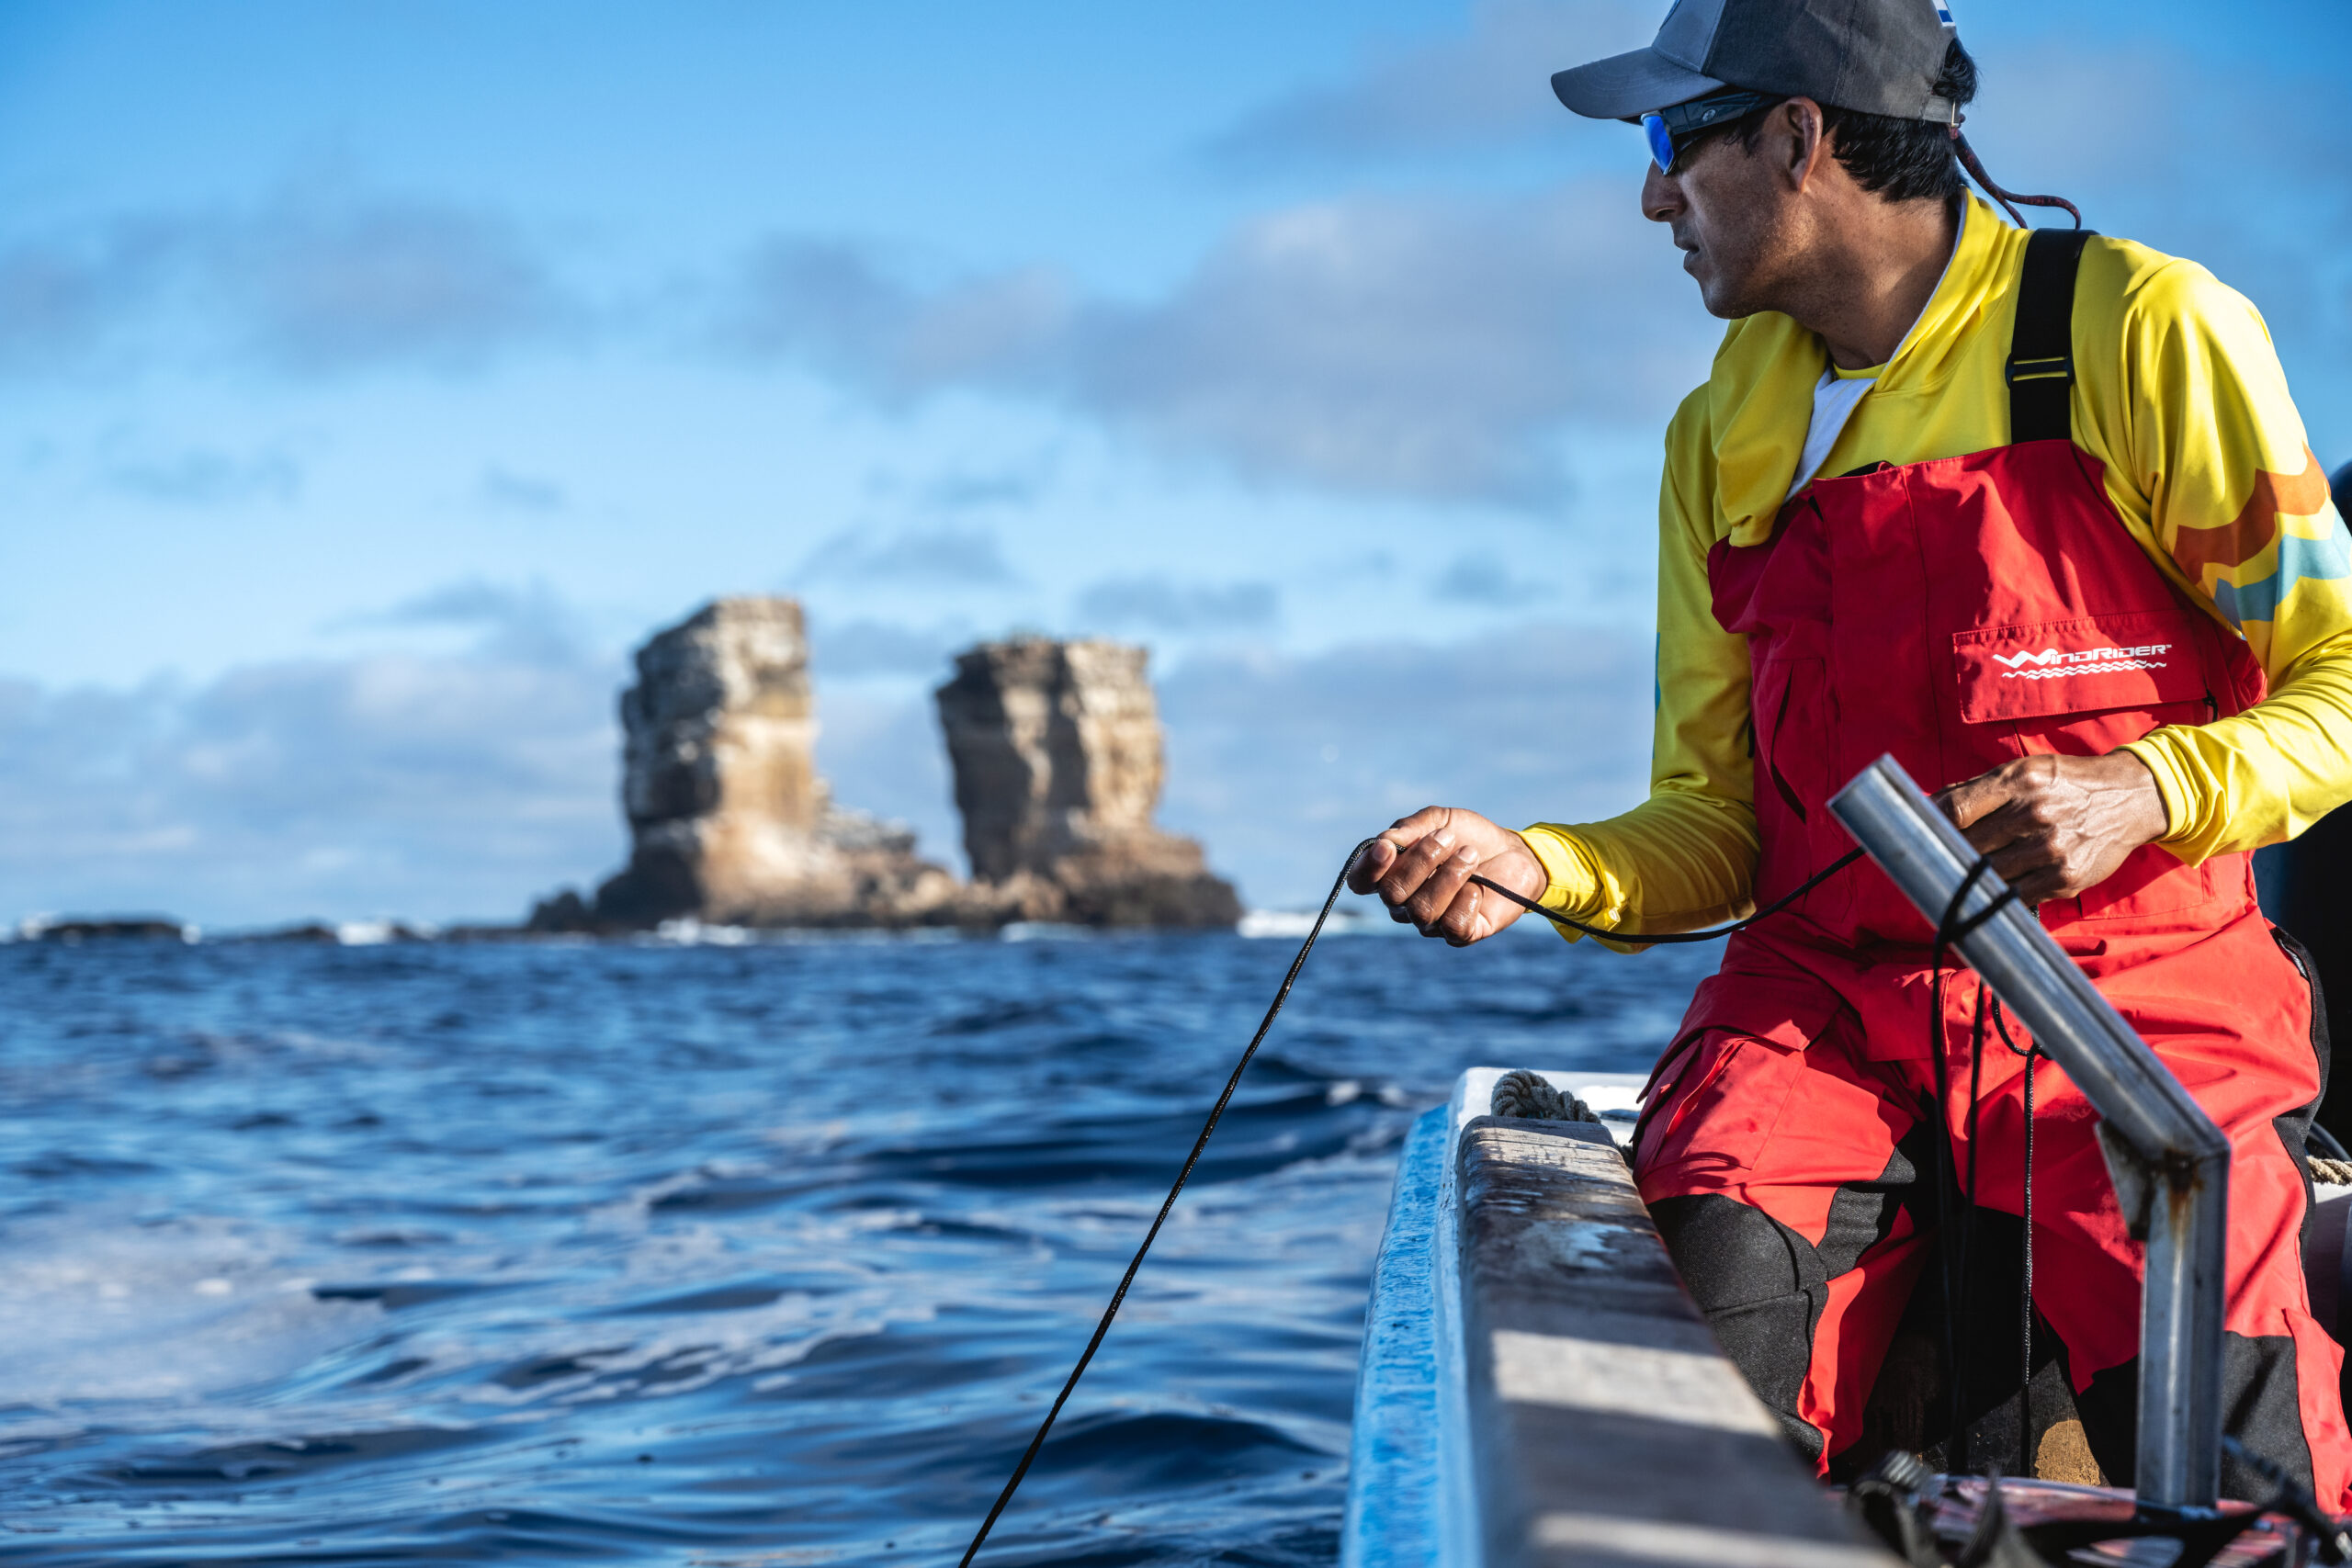 Manuel Yepez, conservationist and Mission
Blue co-Champion for the Galápagos Islands
Hope Spot, attempts to trap and tag a tiger
shark near the famous Darwin’s arch.